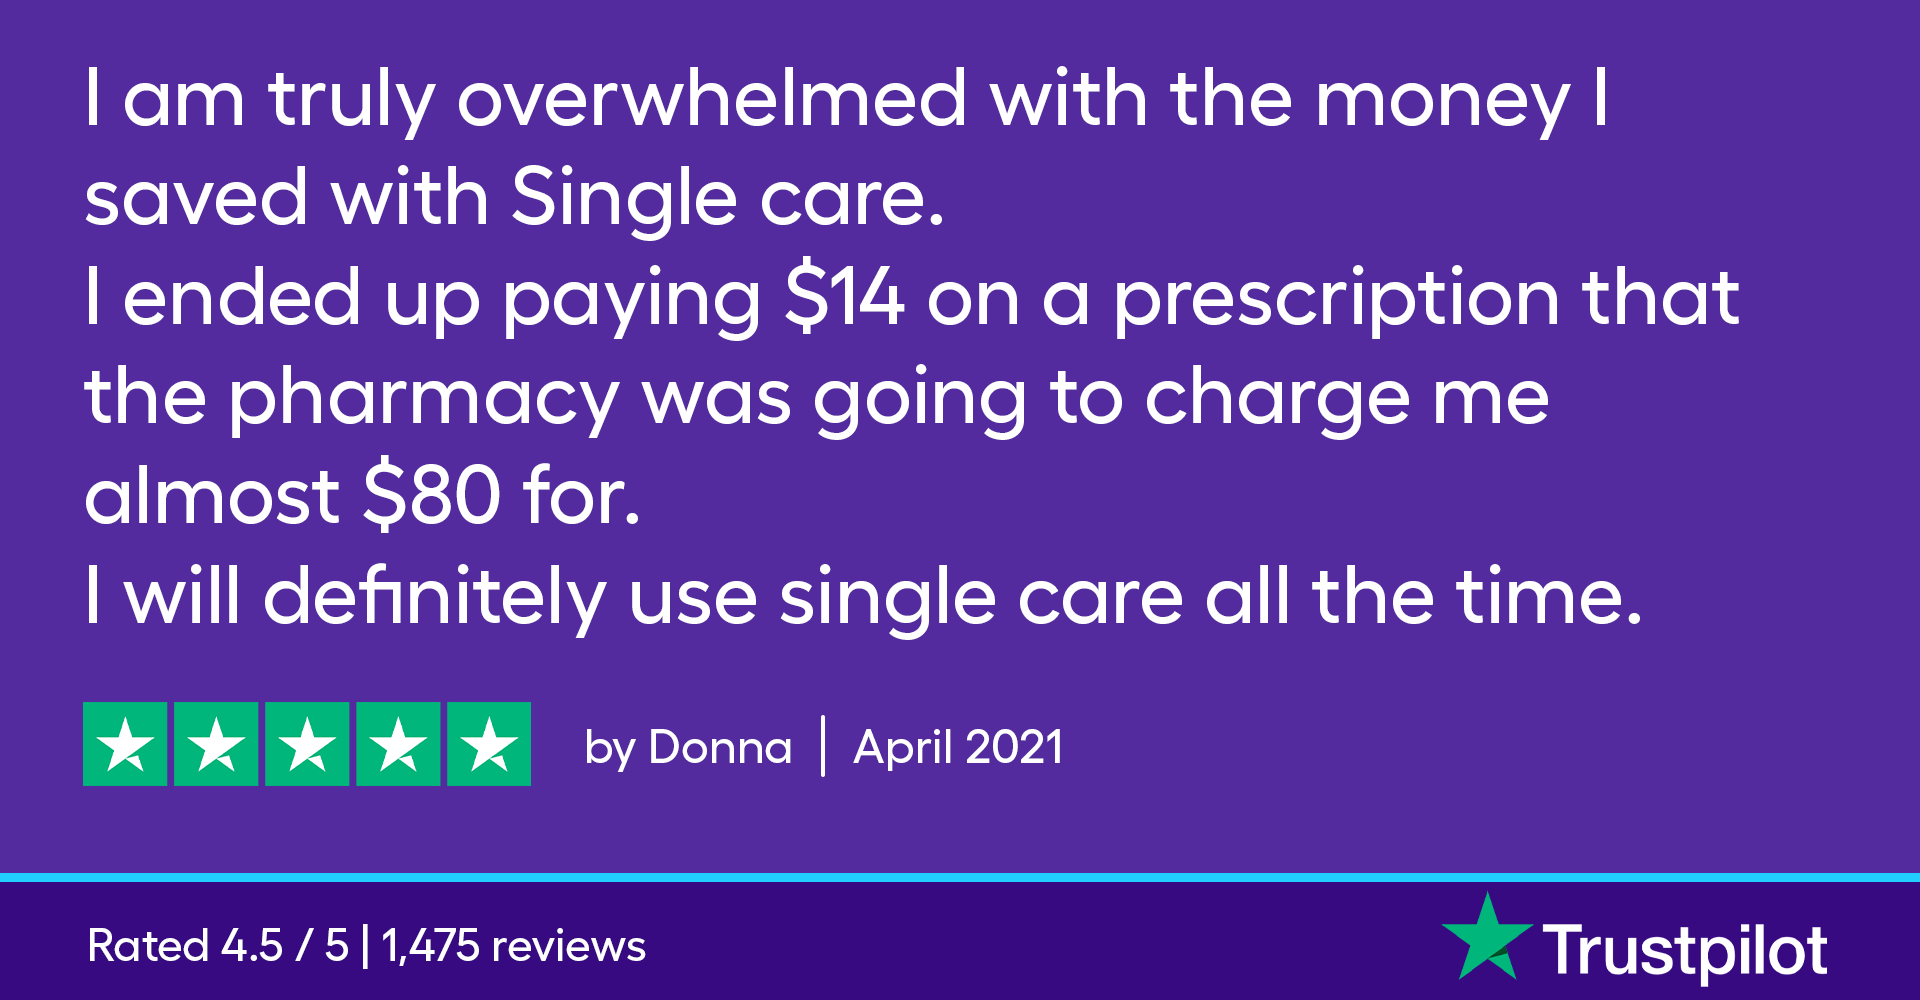 I am truly overwhelmed with the money I saved with SingleCare. I ended up paying $14 on a prescription that the pharmacy was going to charge me almost $80 for. I will definitely use SingleCare all the time.